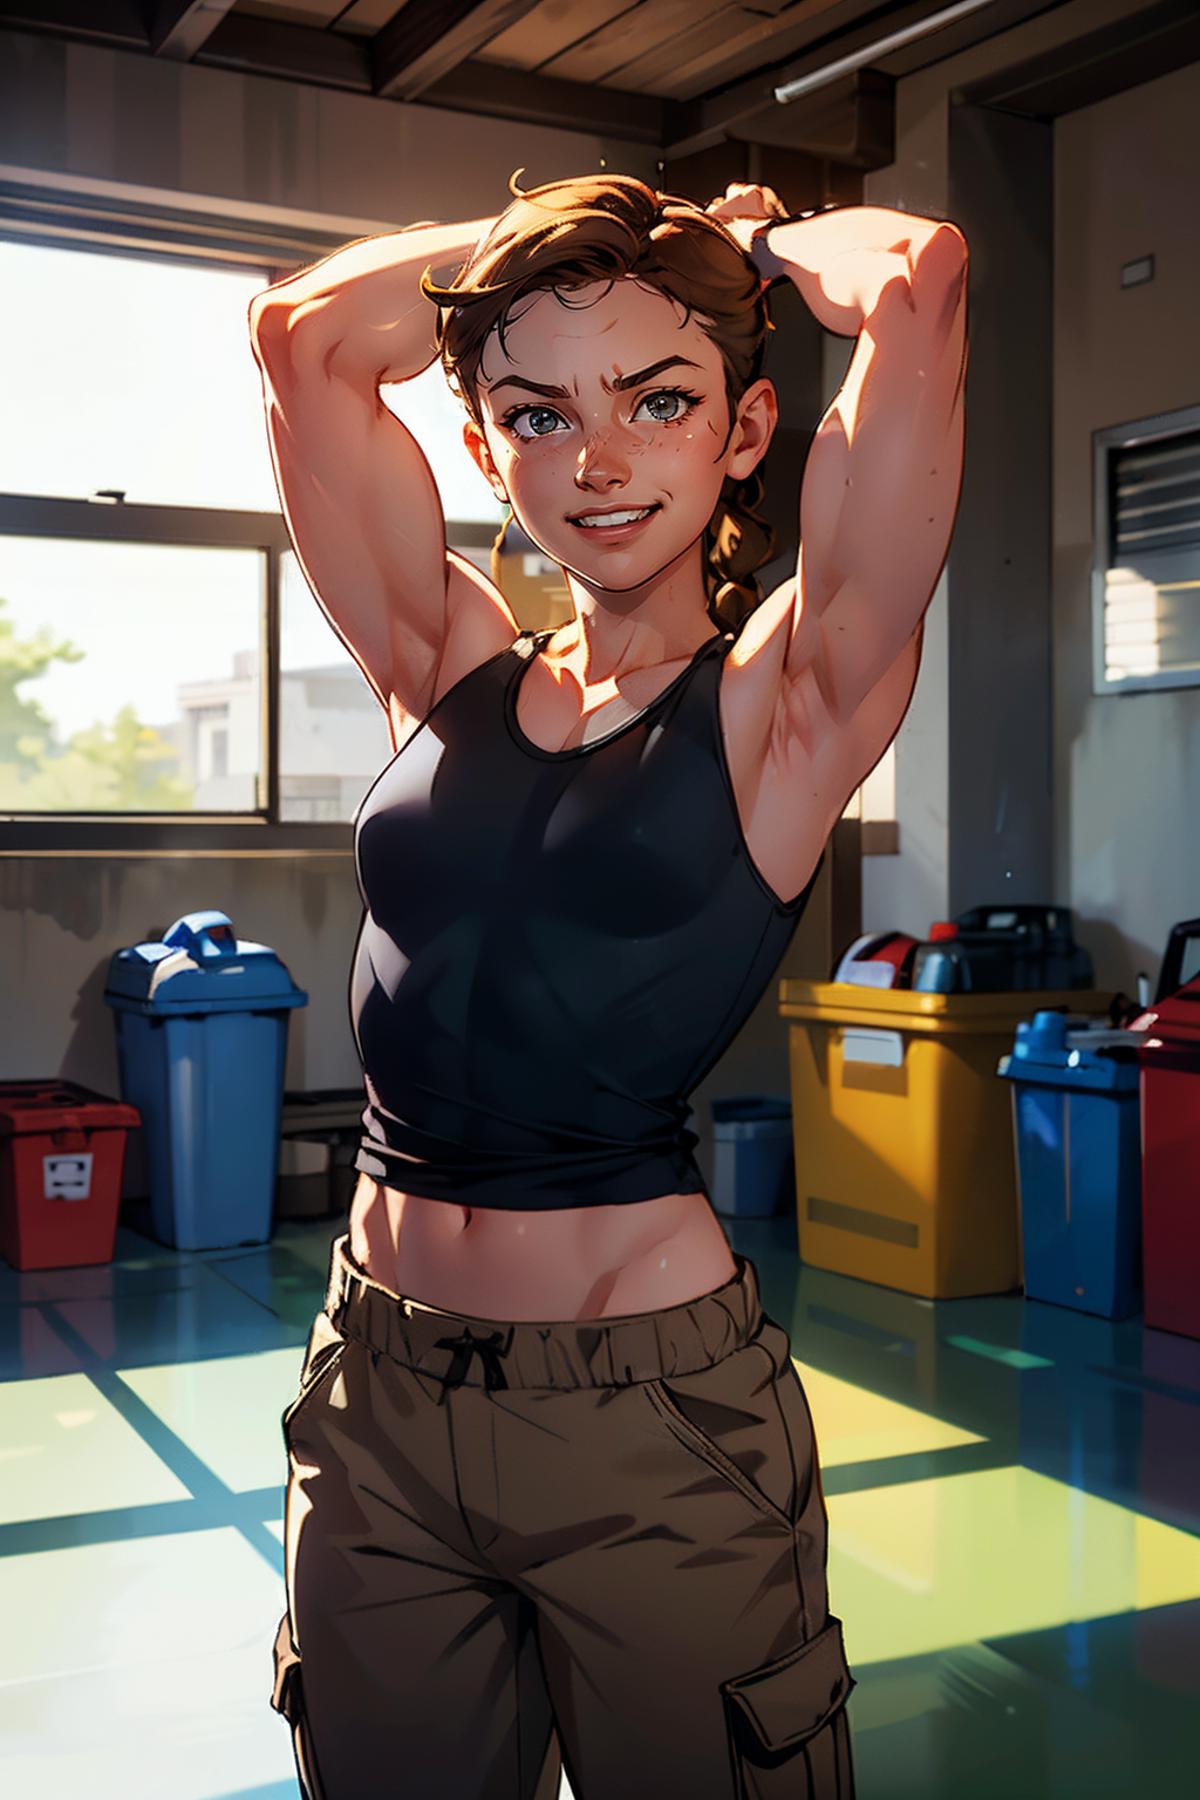 Abby from The Last of Us 2 image by wikkitikki